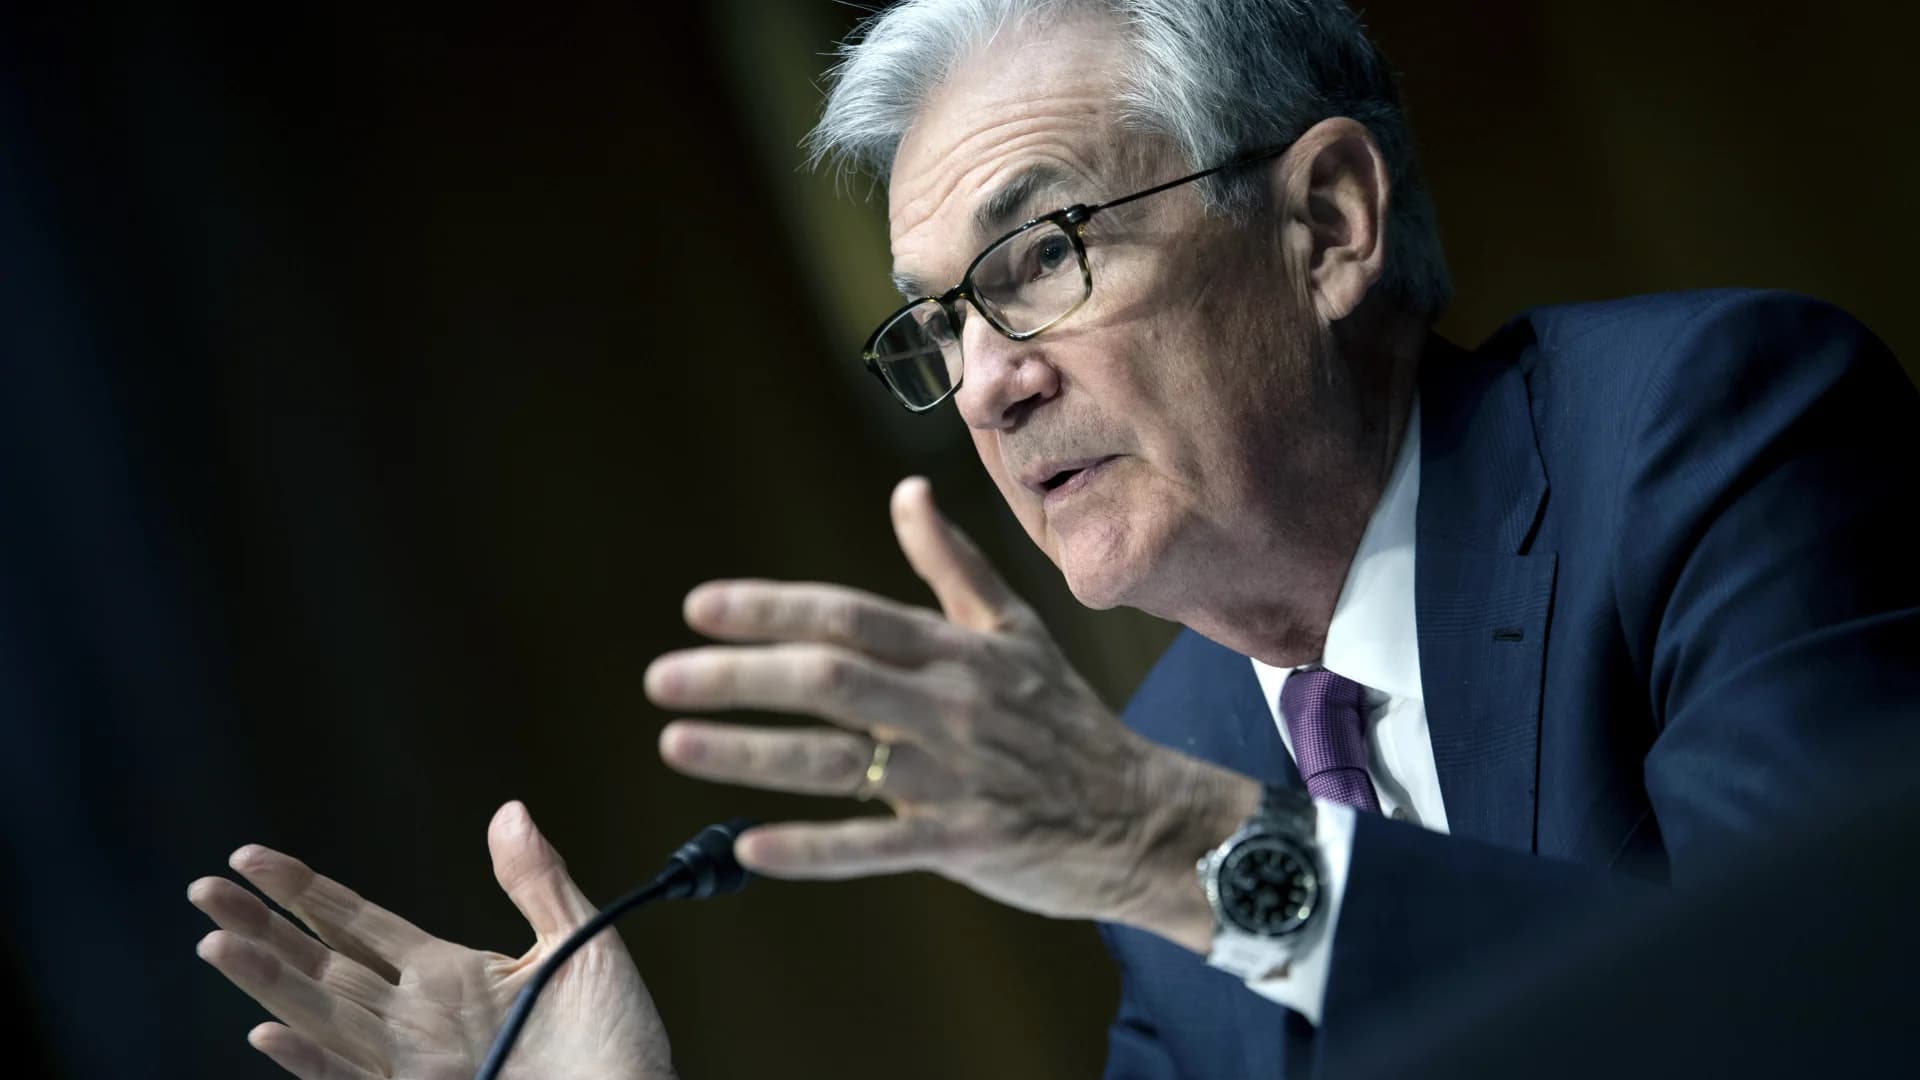 Powell expects a quarter-point Fed rate hike this month